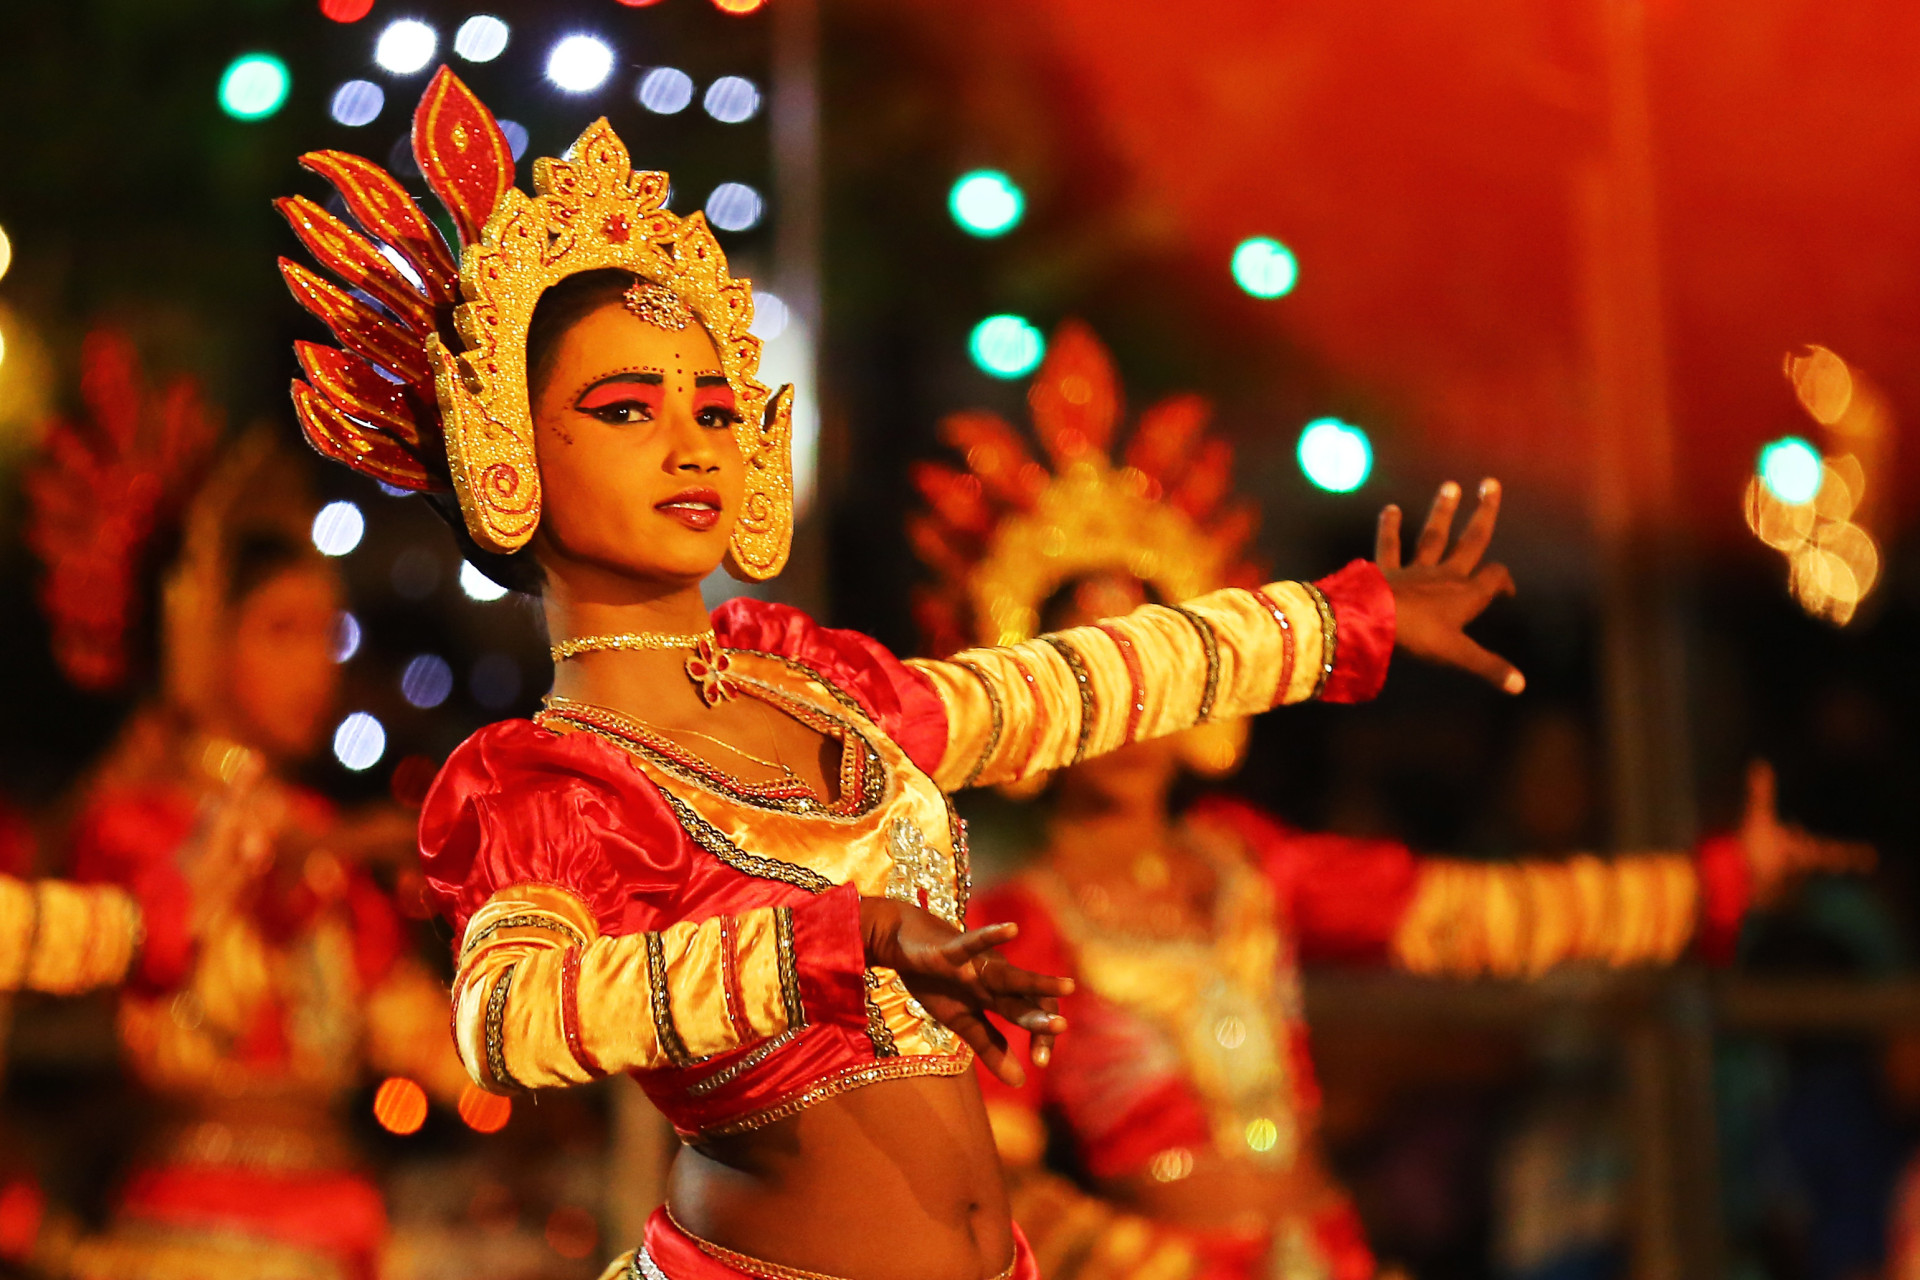 As a multicultural society with a fascinating ancient history, Sri Lanka celebrates an extraordinary variety of festivals, ceremonies, and events.<p>You may also like:<a href="https://www.starsinsider.com/n/490598?utm_source=msn.com&utm_medium=display&utm_campaign=referral_description&utm_content=273472v10en-us"> Did sin destroy the cities? Unraveling Sodom and Gomorrah's tale</a></p>